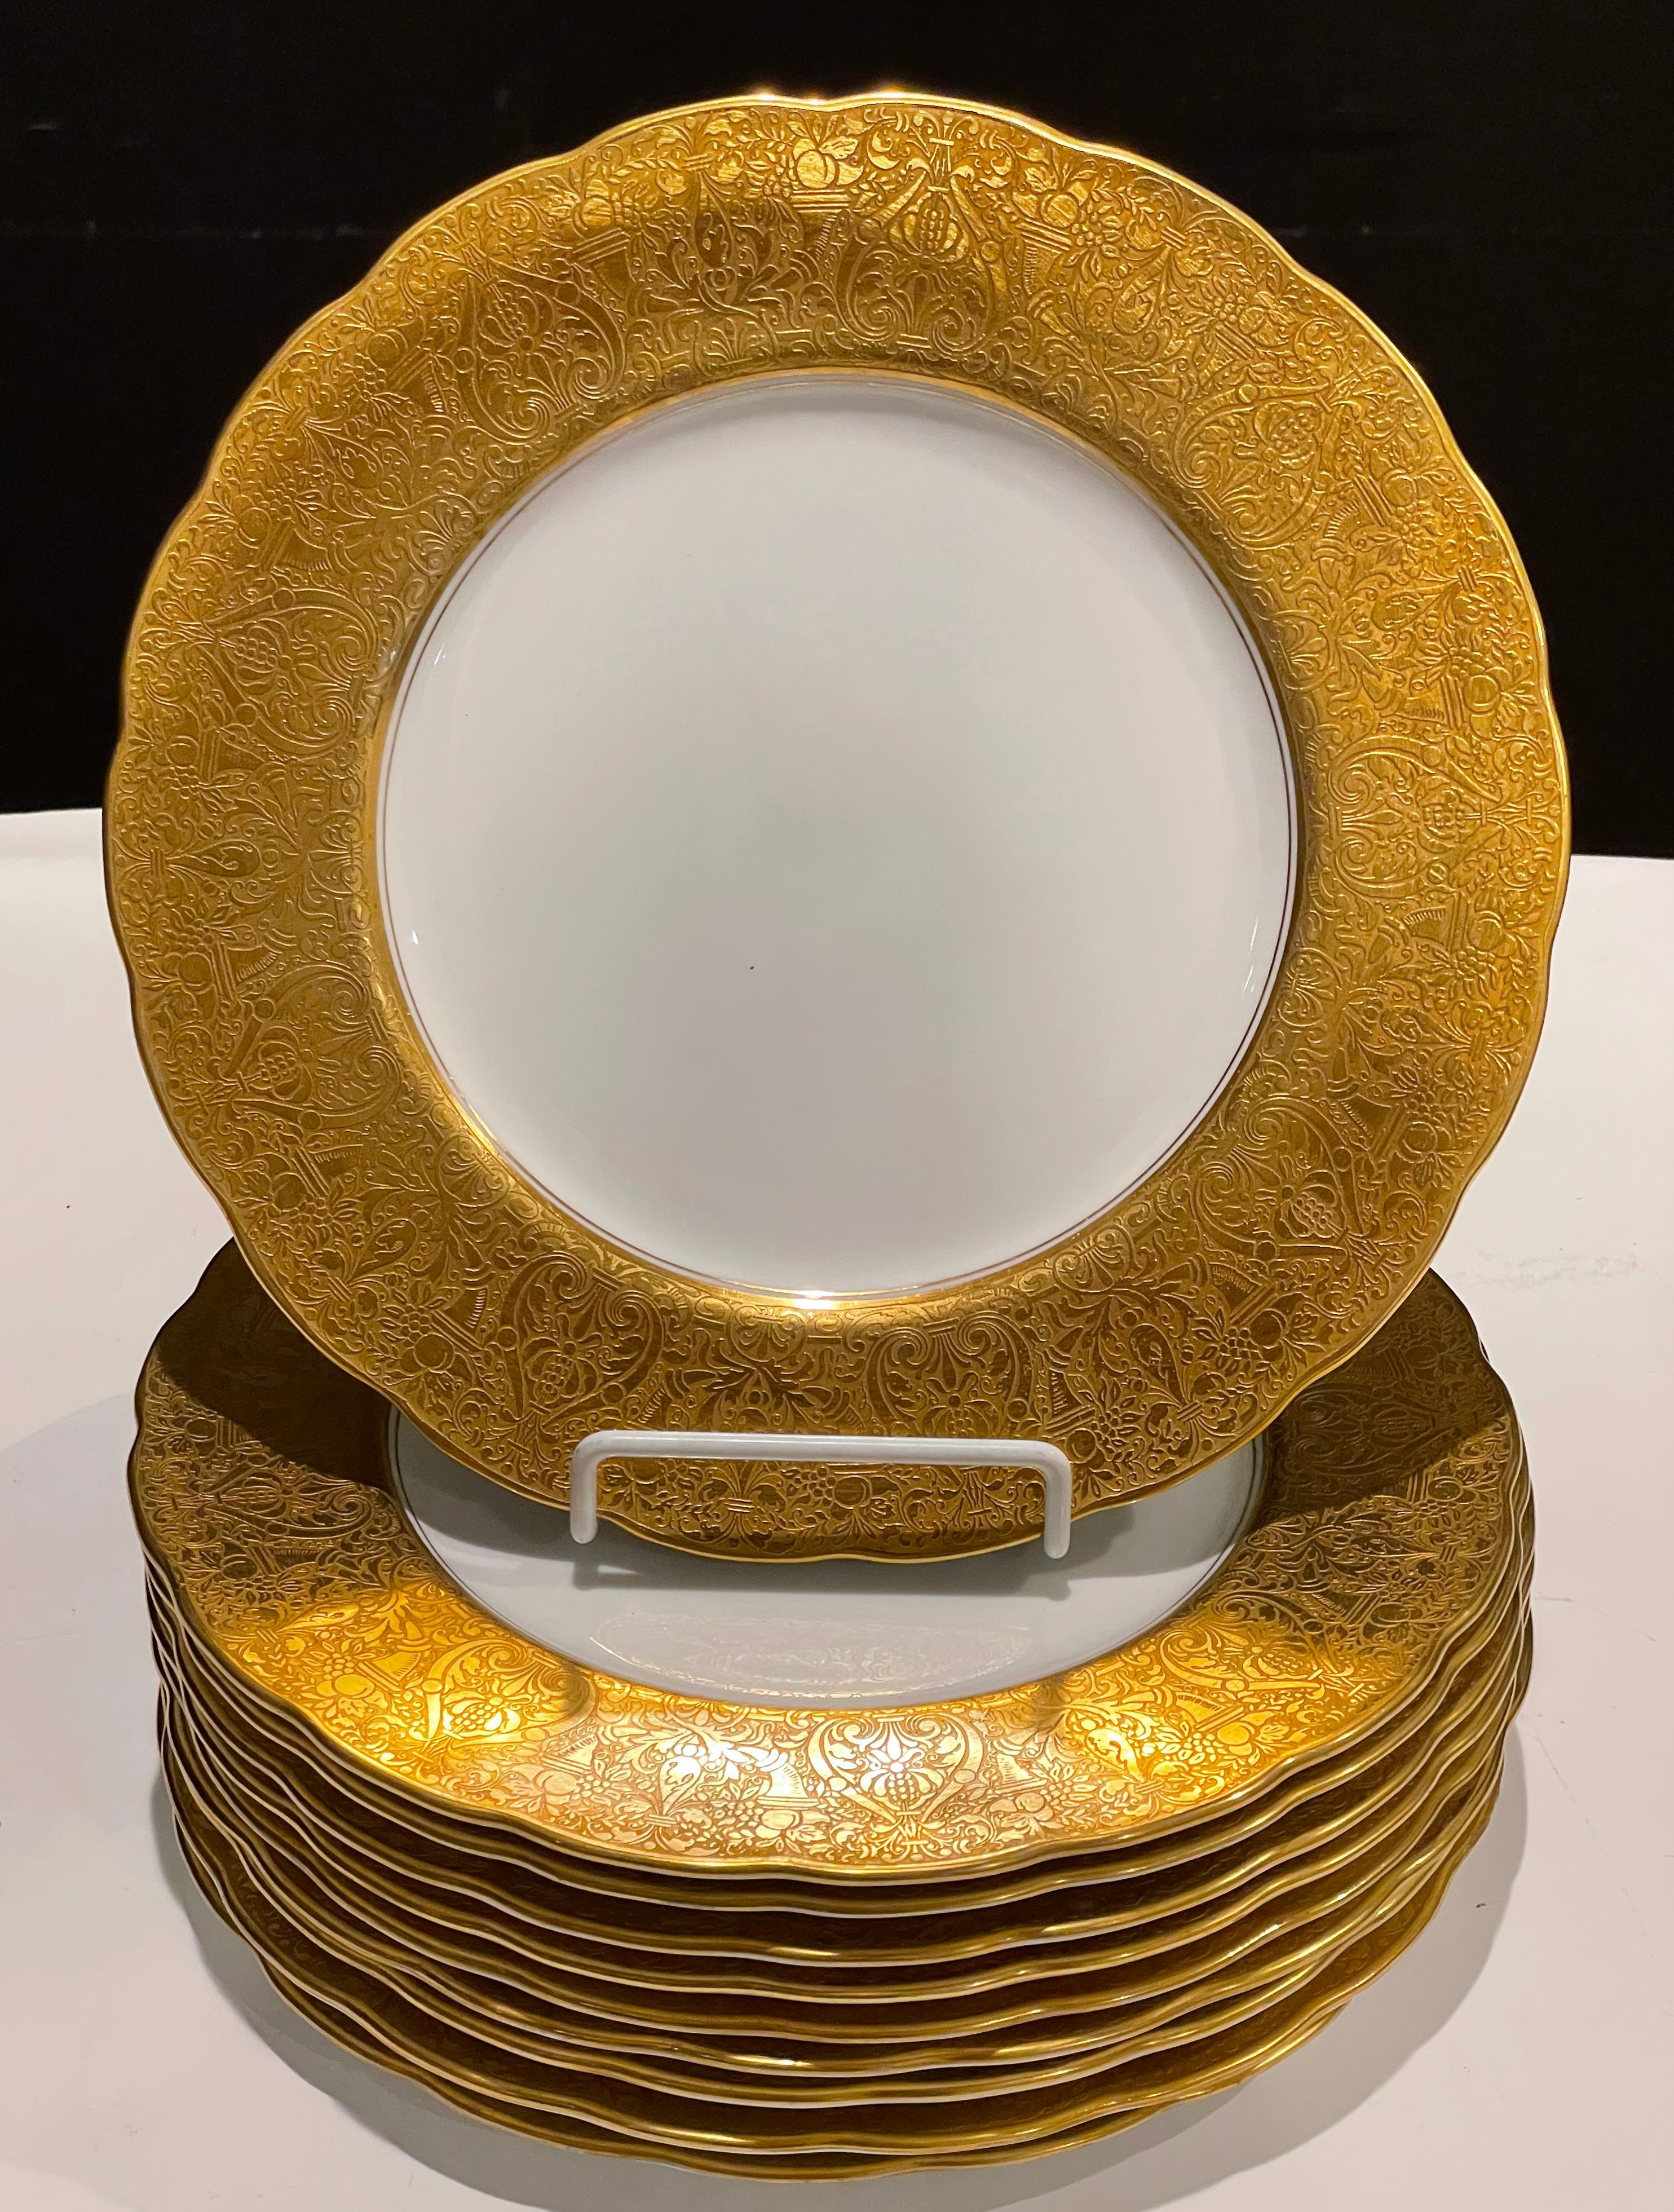 Set of 10 Crescent & Sons heavily gilt porcelain dinner plates retailed by Ovington Bros. Co. New York. White porcelain with large gilt edge border featuring cornucopia and florals.